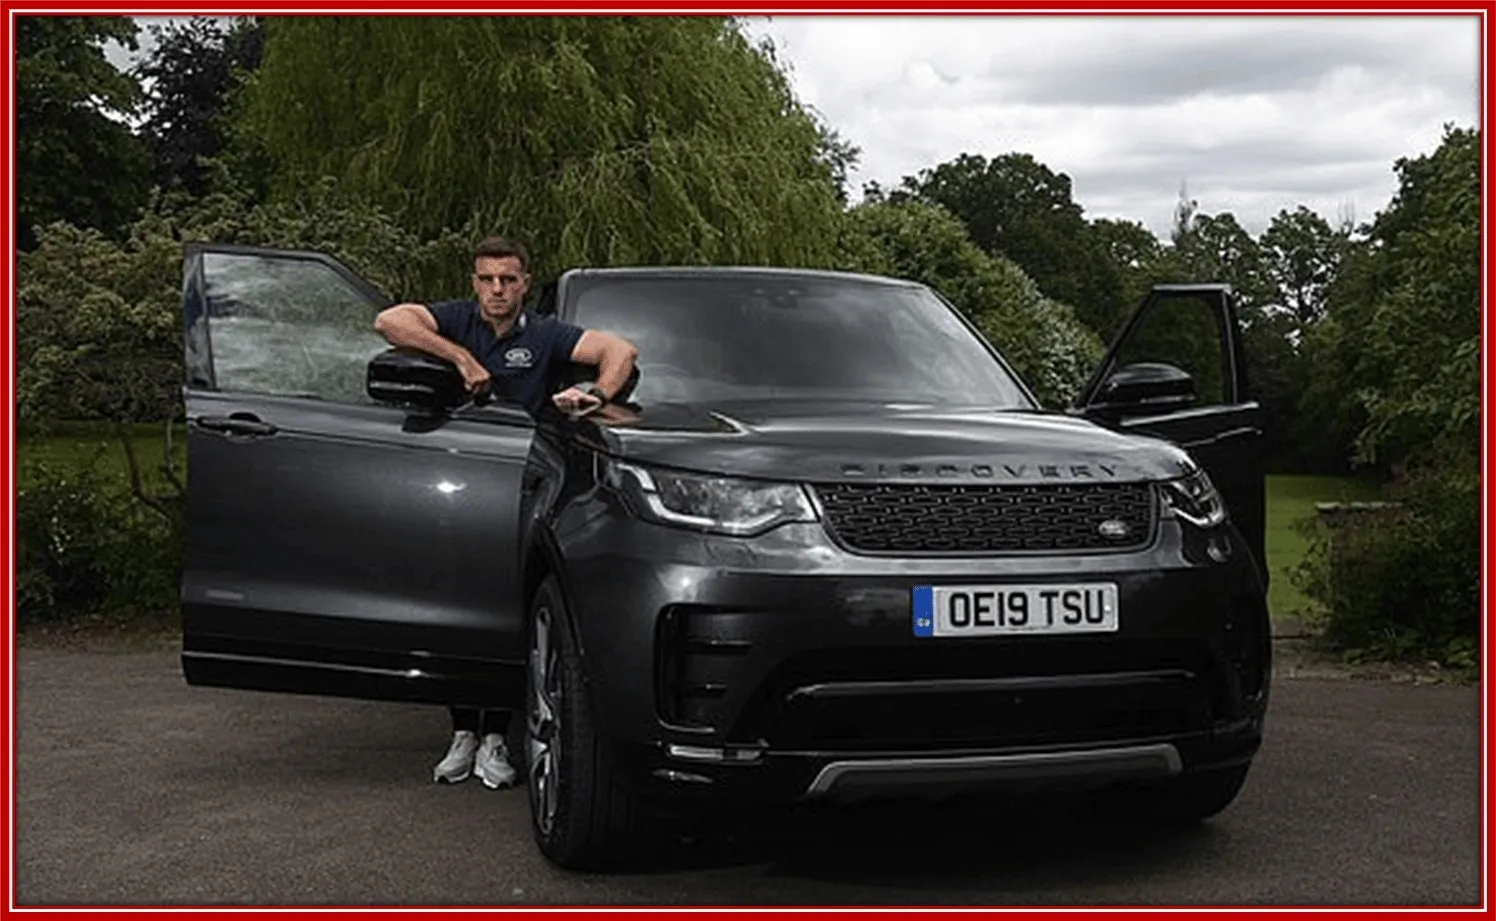 Owen Farrell has driven many cars but currently owns and operates a Land Rover defender.